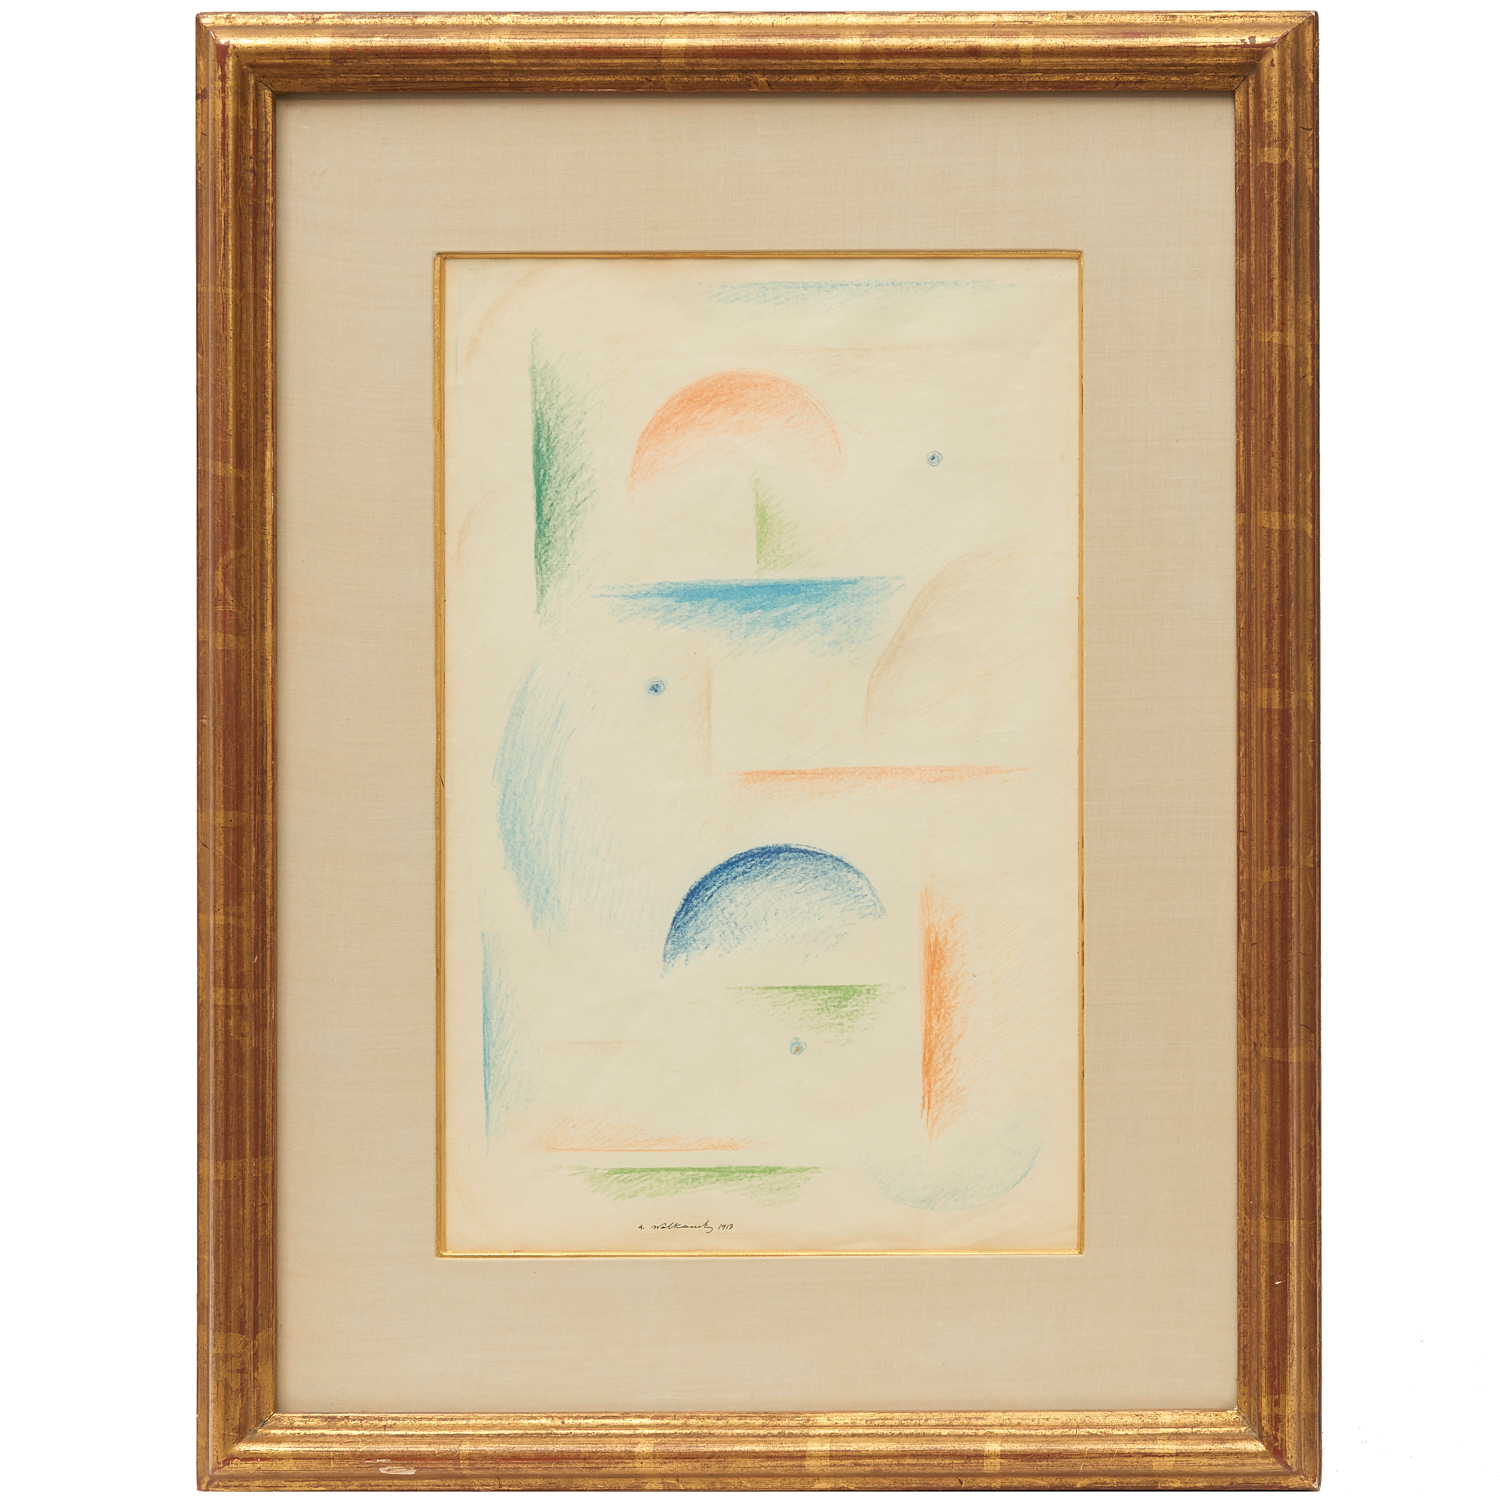 ABRAHAM WALKOWITZ COLORED CRAYON 2ce963